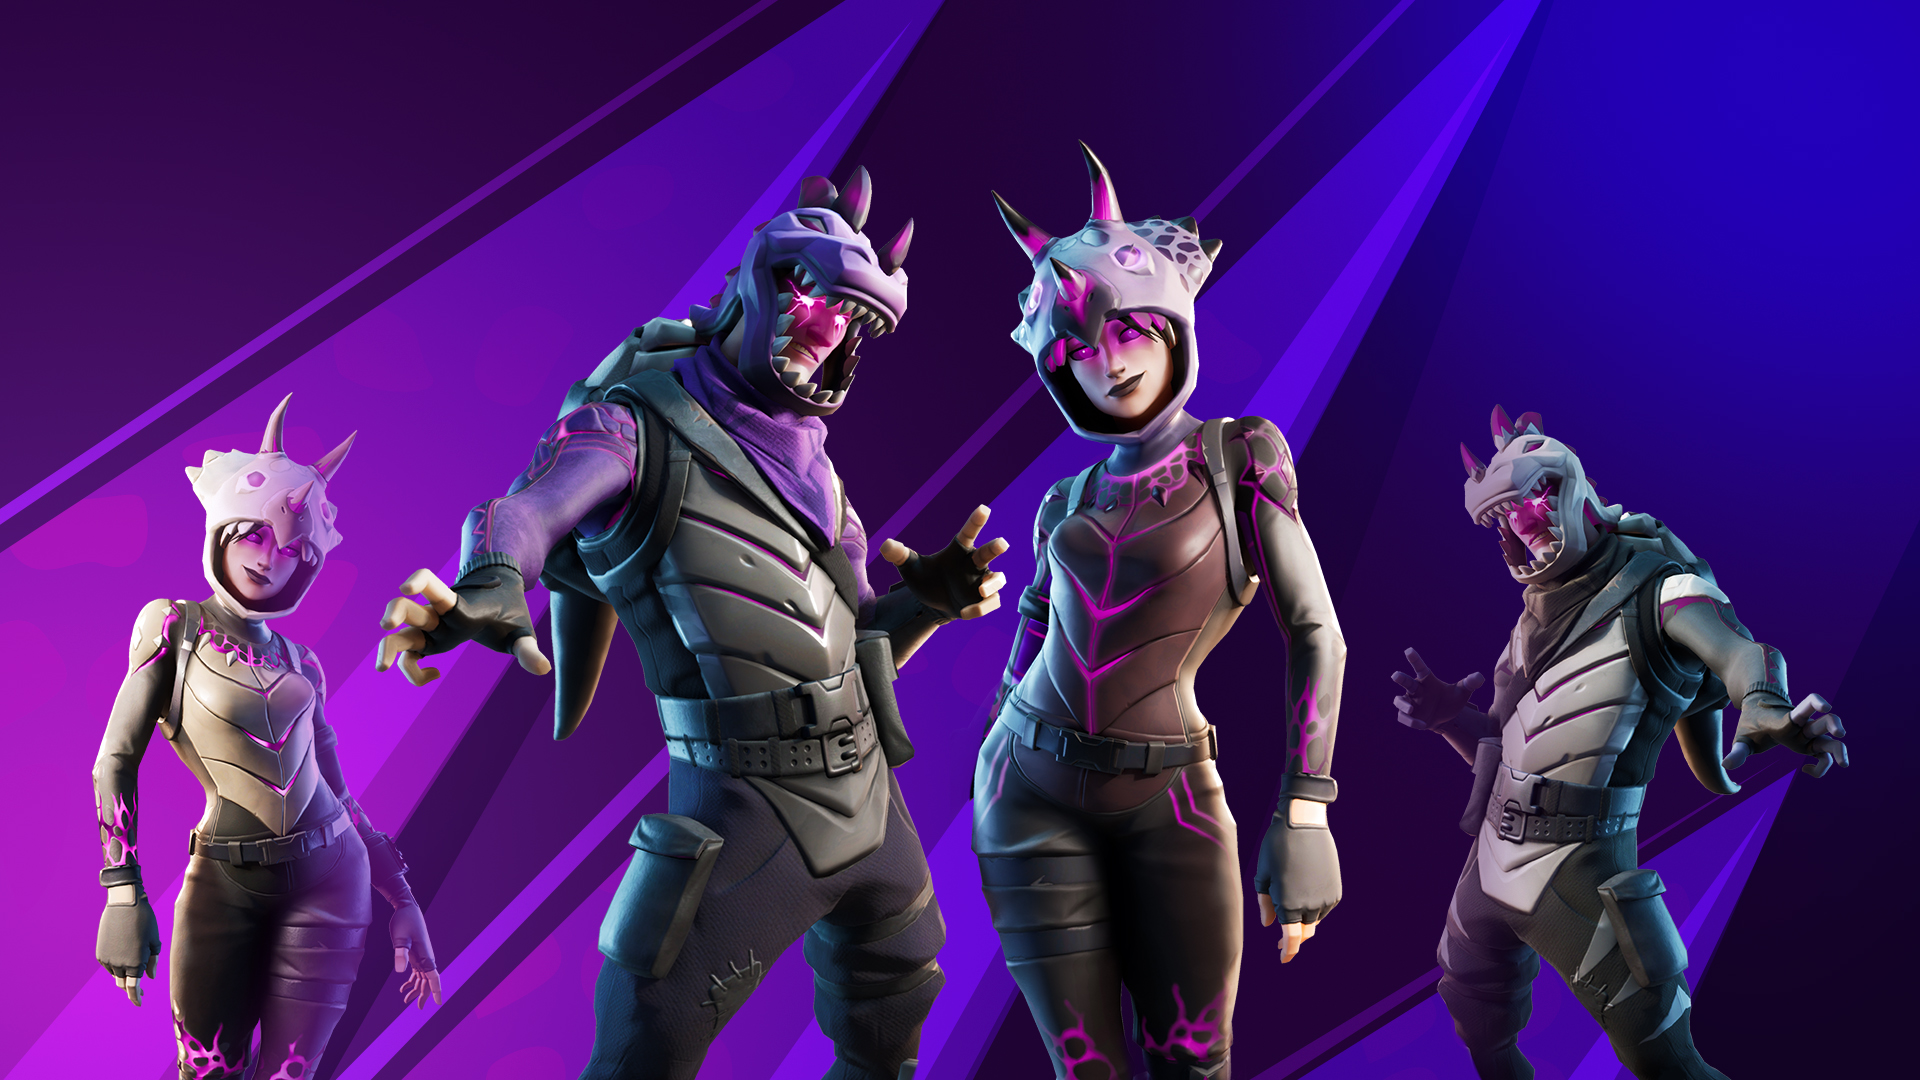 Tricera Ops Fortnite Wallpapers